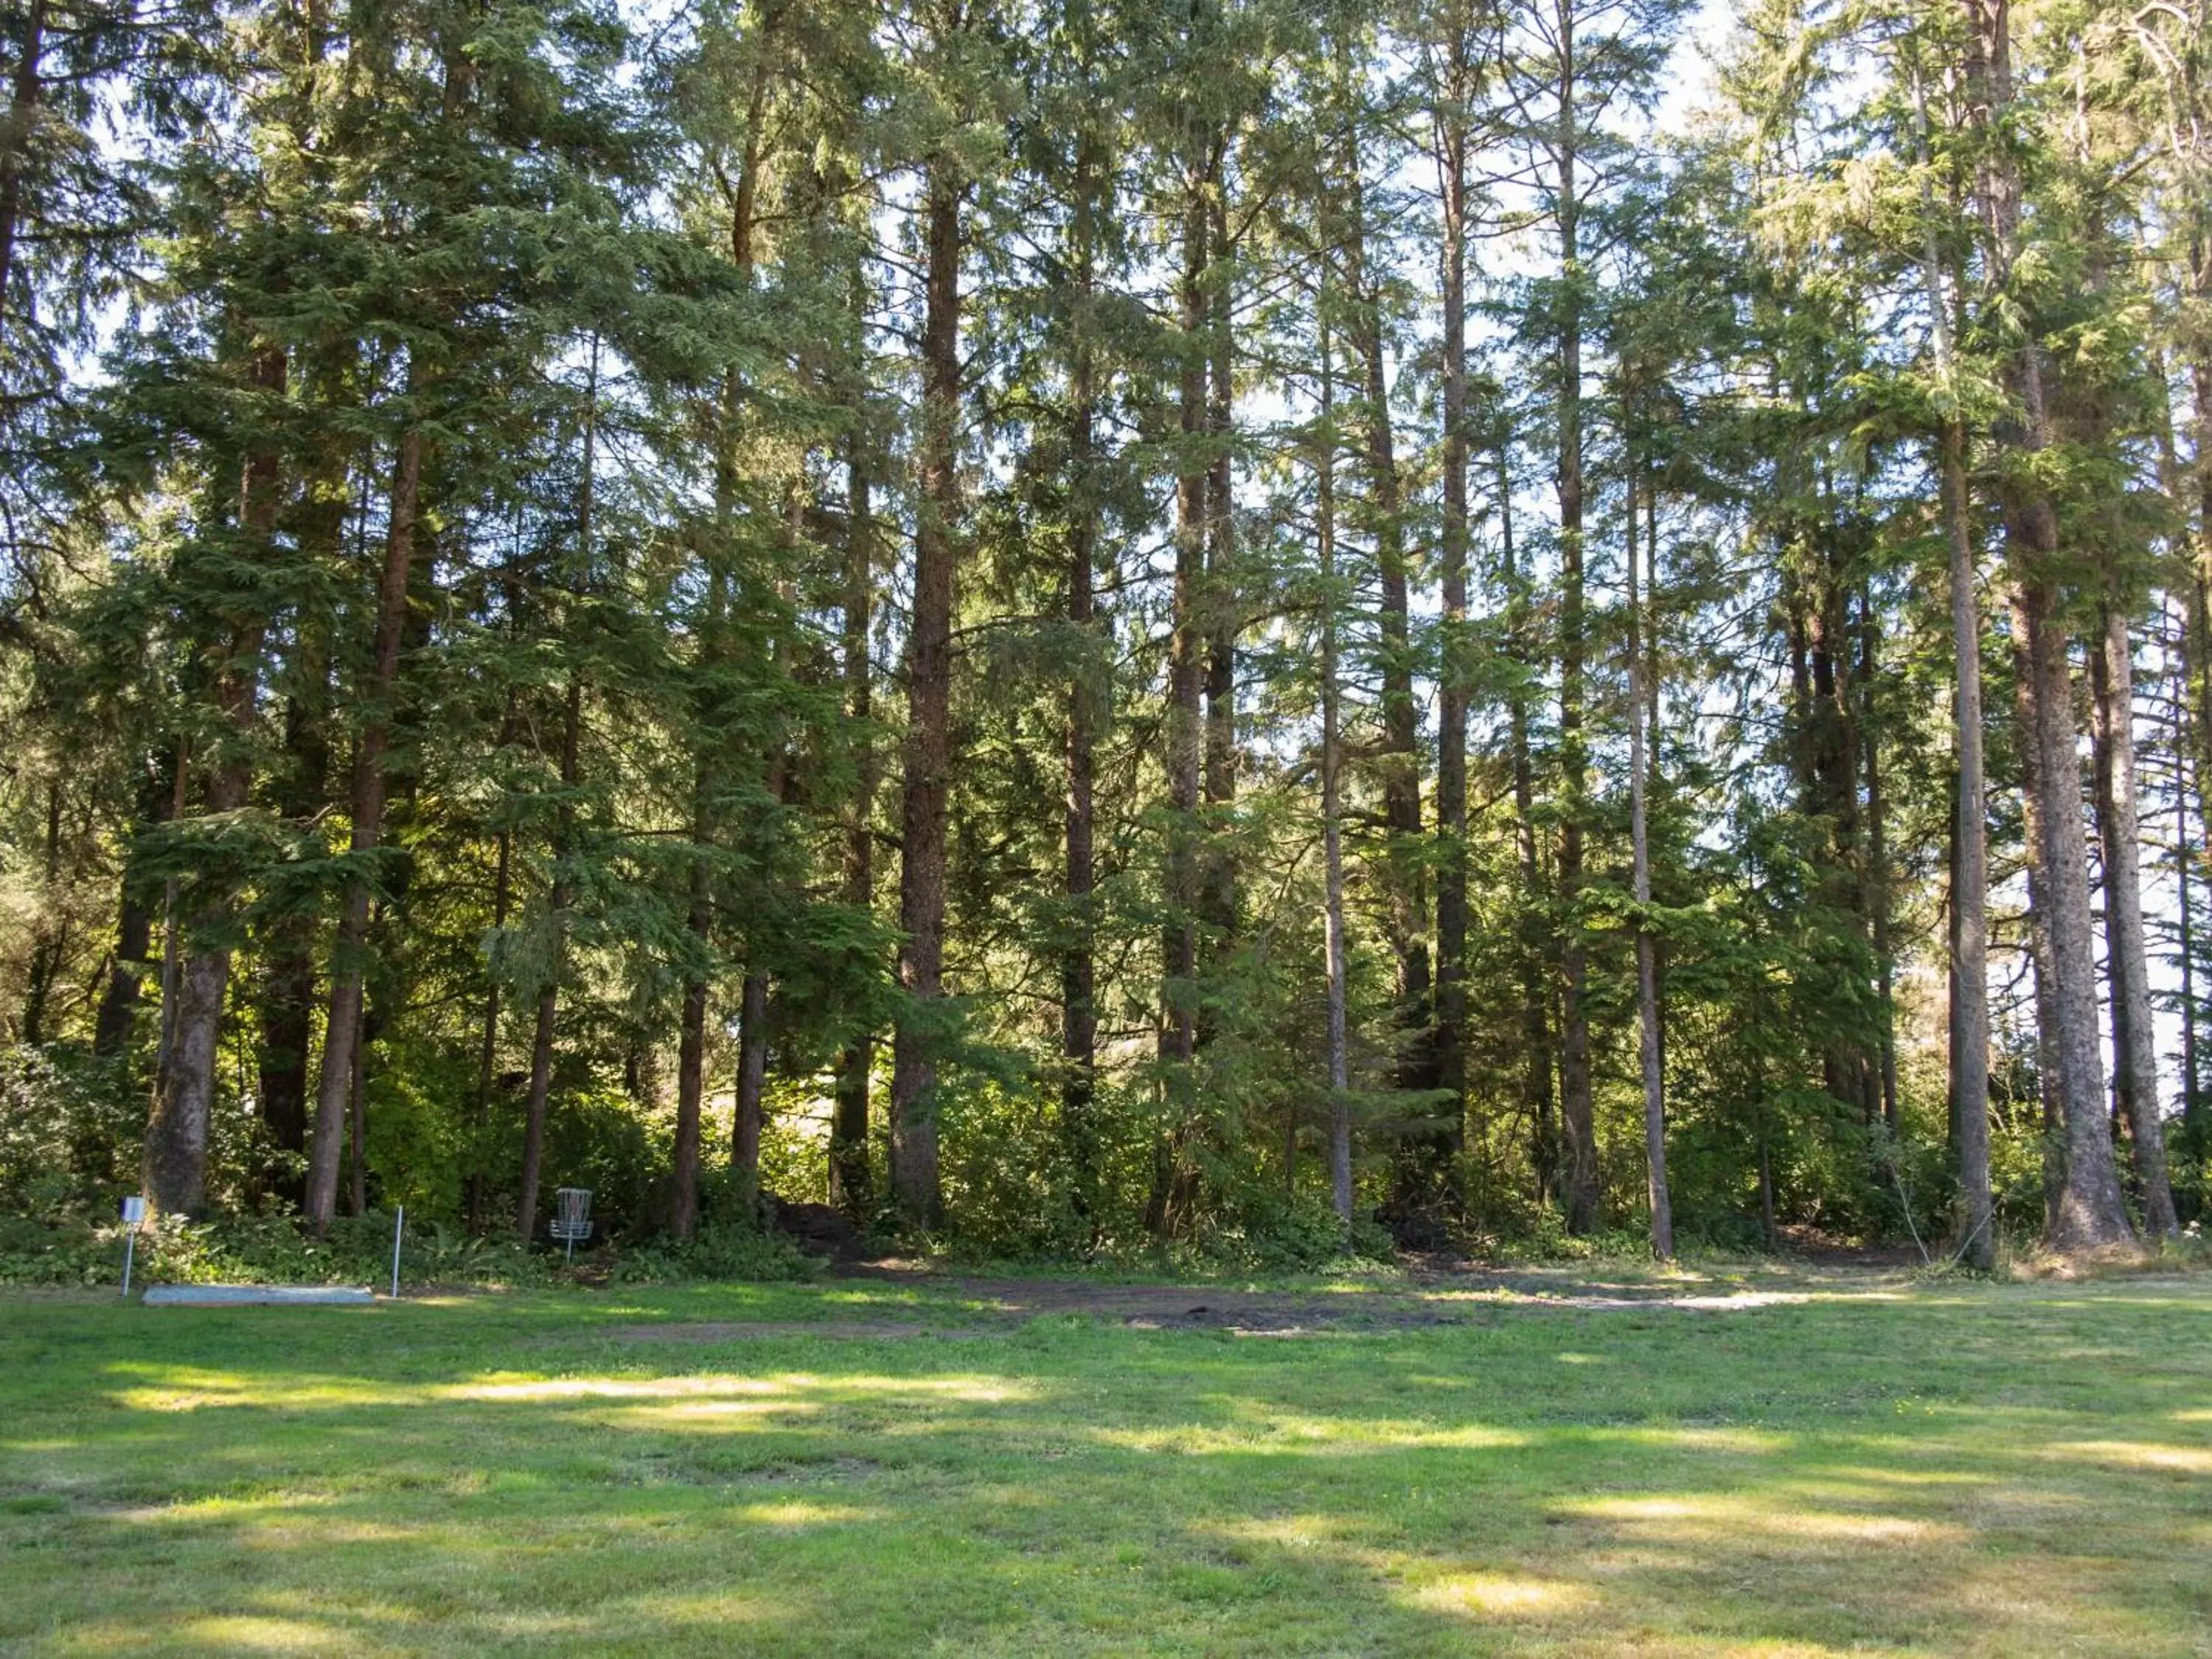 Area and facilities, Garden in Sheltered Nook On Tillamook Bay